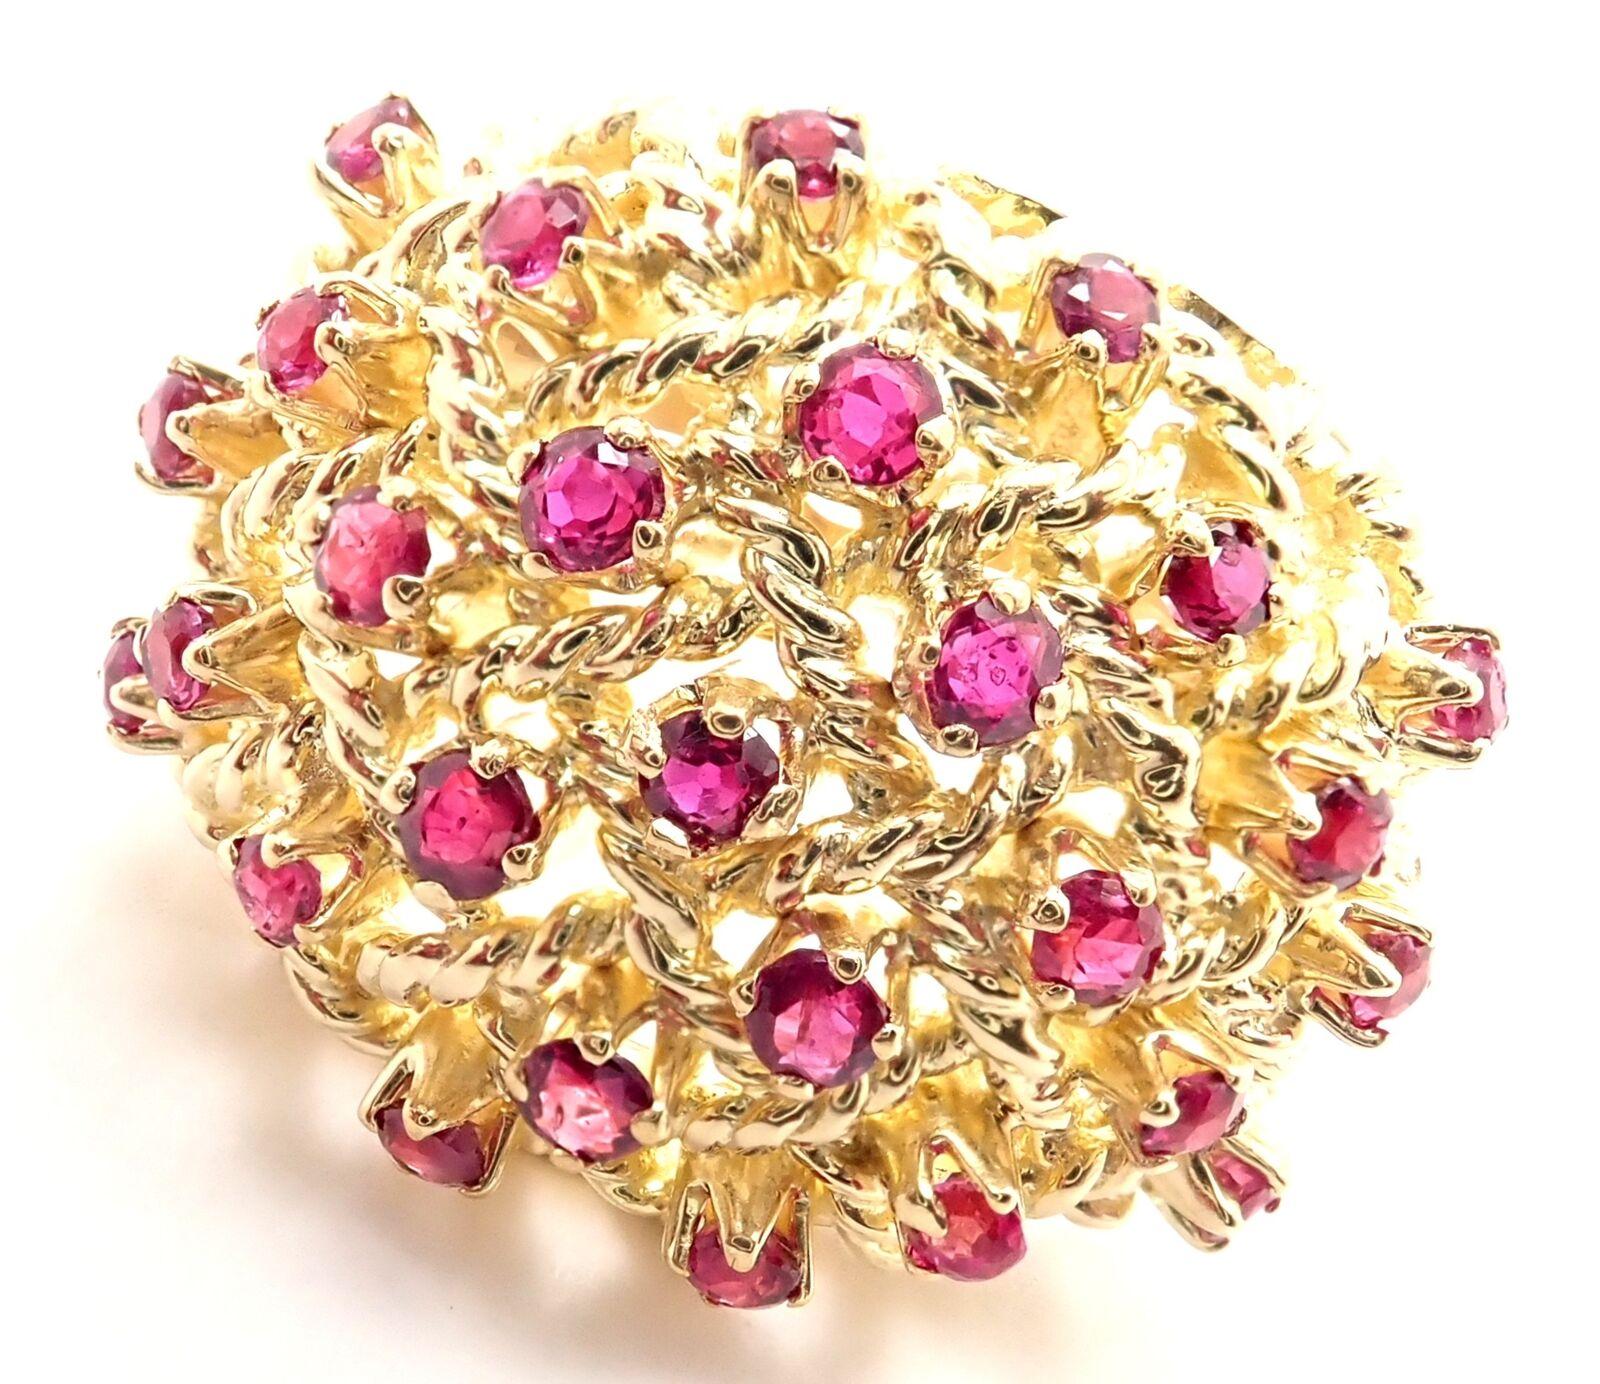 18k Yellow Gold Vintage Ruby Cocktail Dome Ring by Tiffany & Co.
With 28 Round Ruby Stones.
Details:
Size: 5 1/2
Weight: 7.5 grams
Width: 17mm
Stamped Hallmarks: Tiffany 18k Italy
*Free Shipping within the United States*
YOUR PRICE: $3,900
T3192red